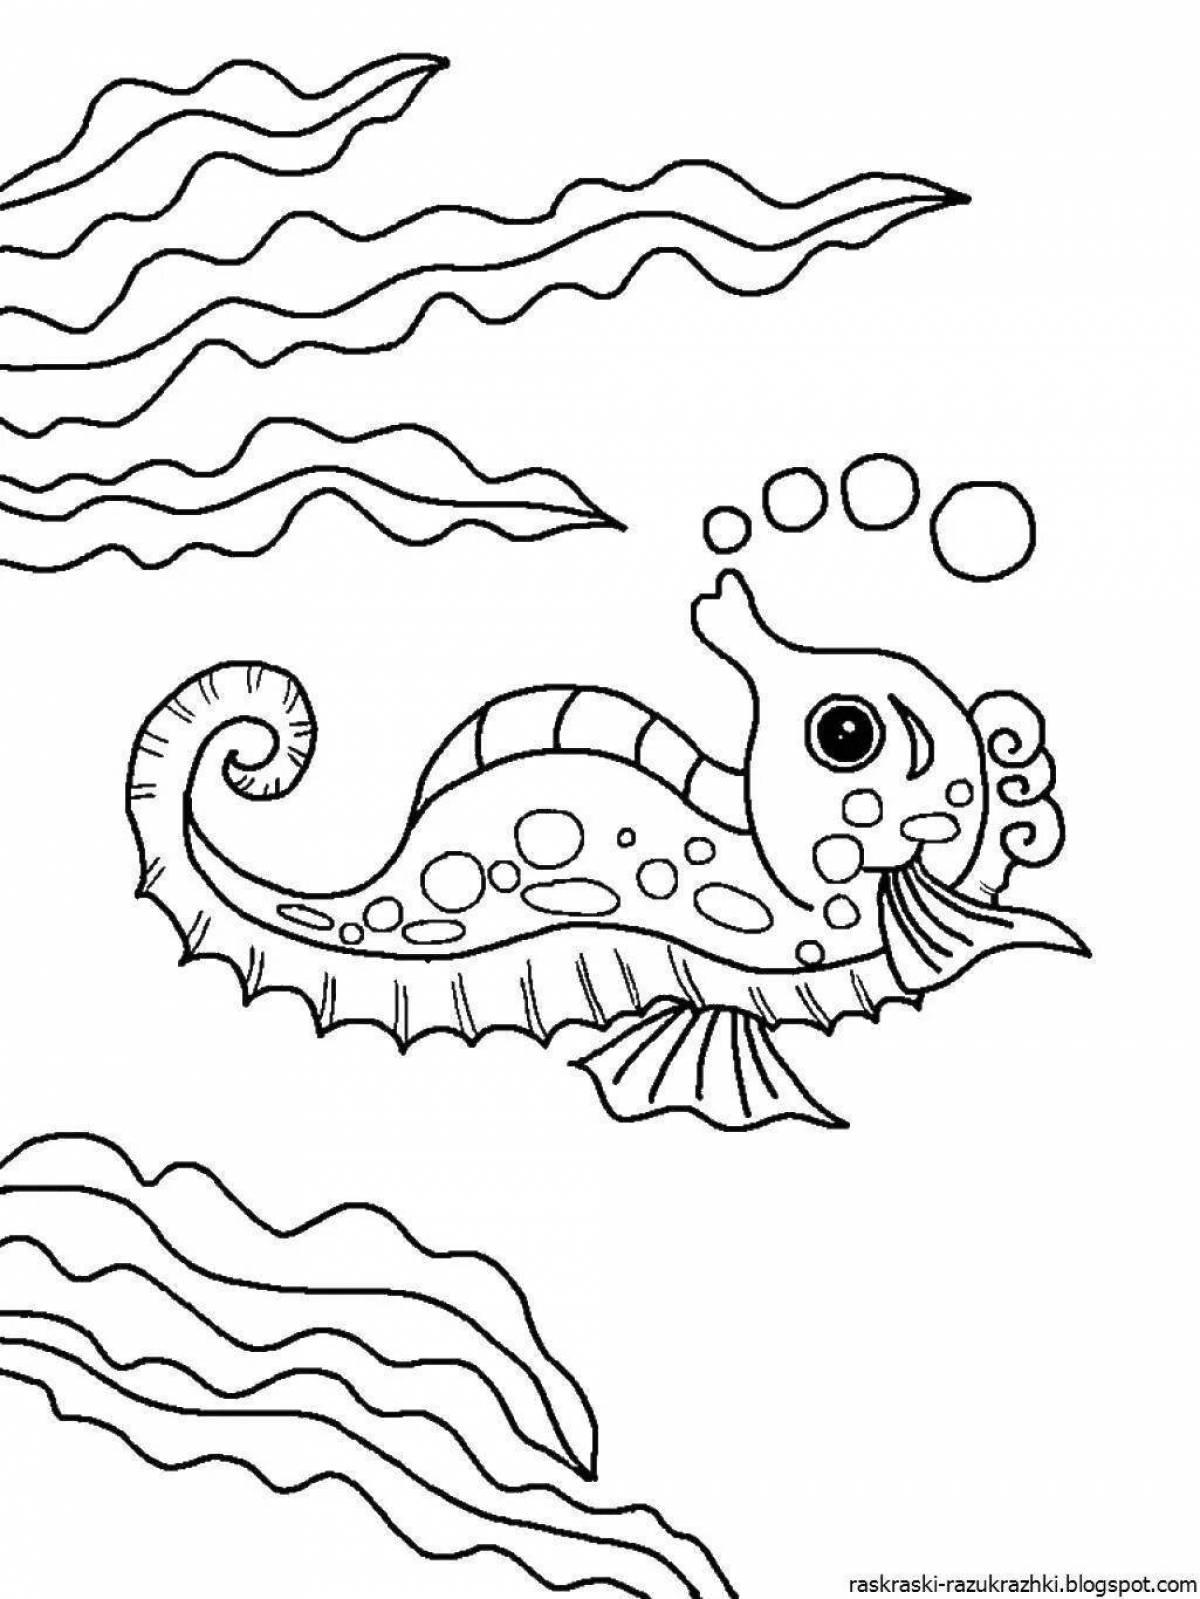 Sparkly aquatic life coloring page